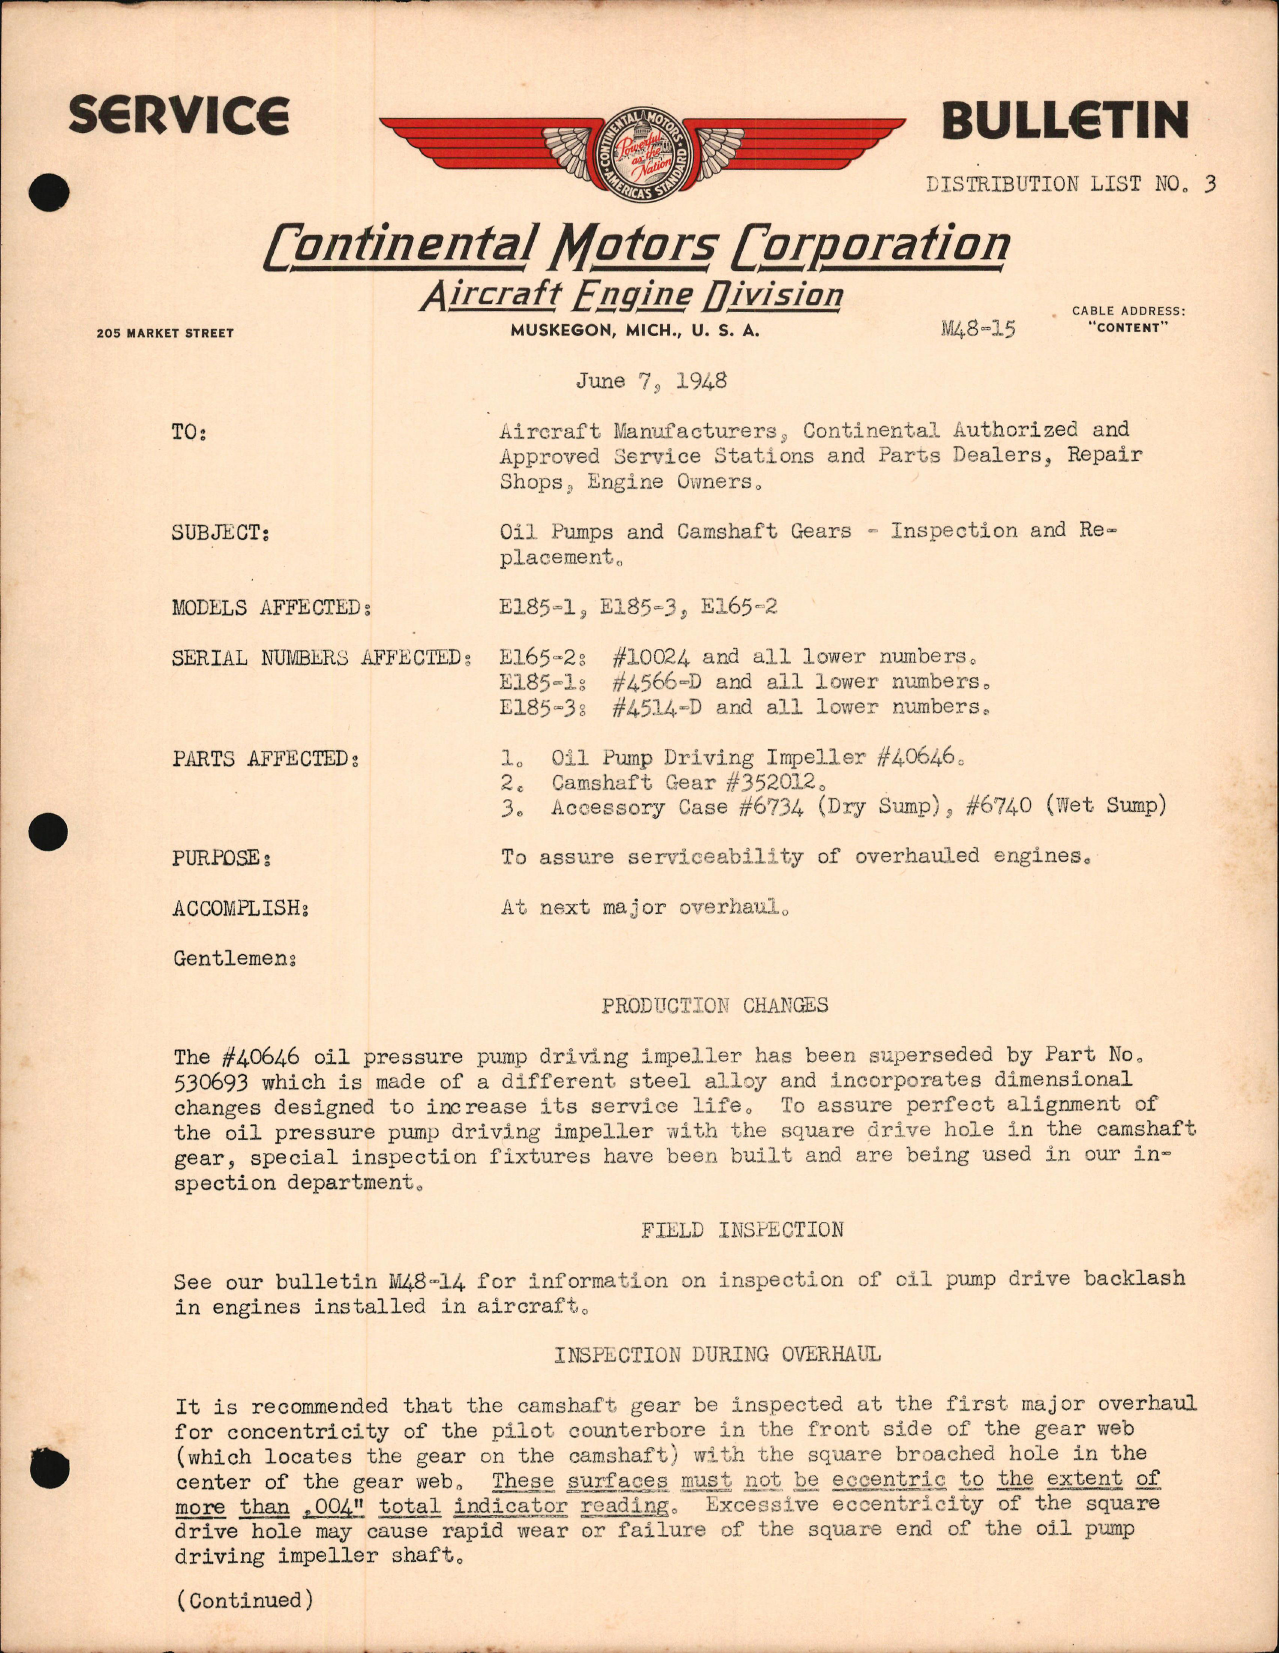 Sample page 1 from AirCorps Library document: Oil Pumps & Camshaft Gears, Inspections & Replacement